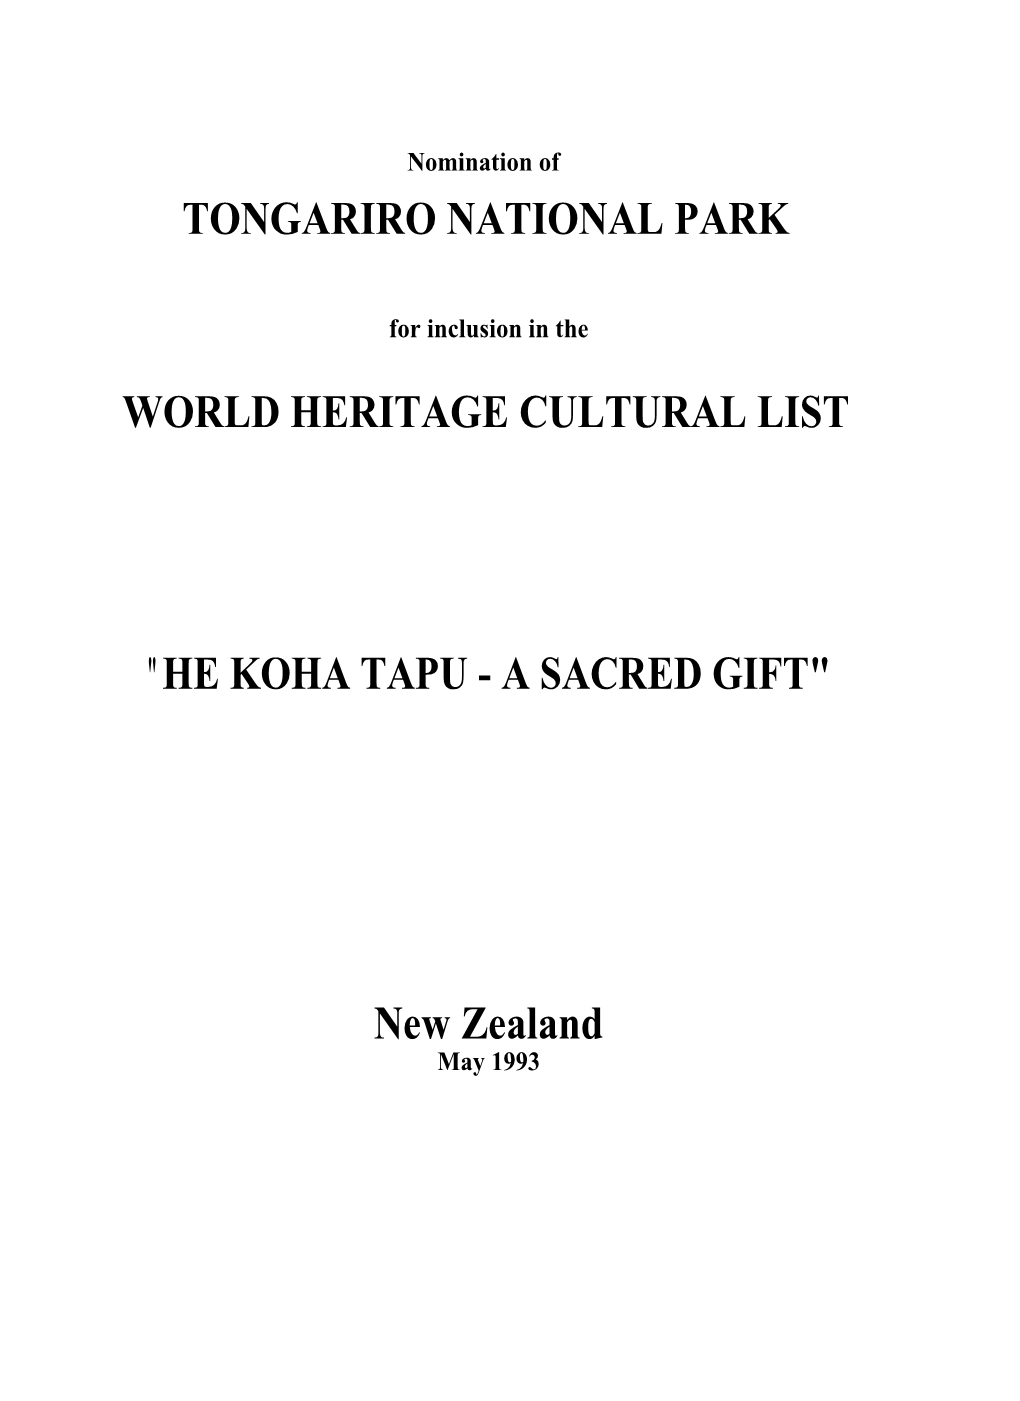 Nomination of Tongariro National Park for Inclusioni in the World Heritage